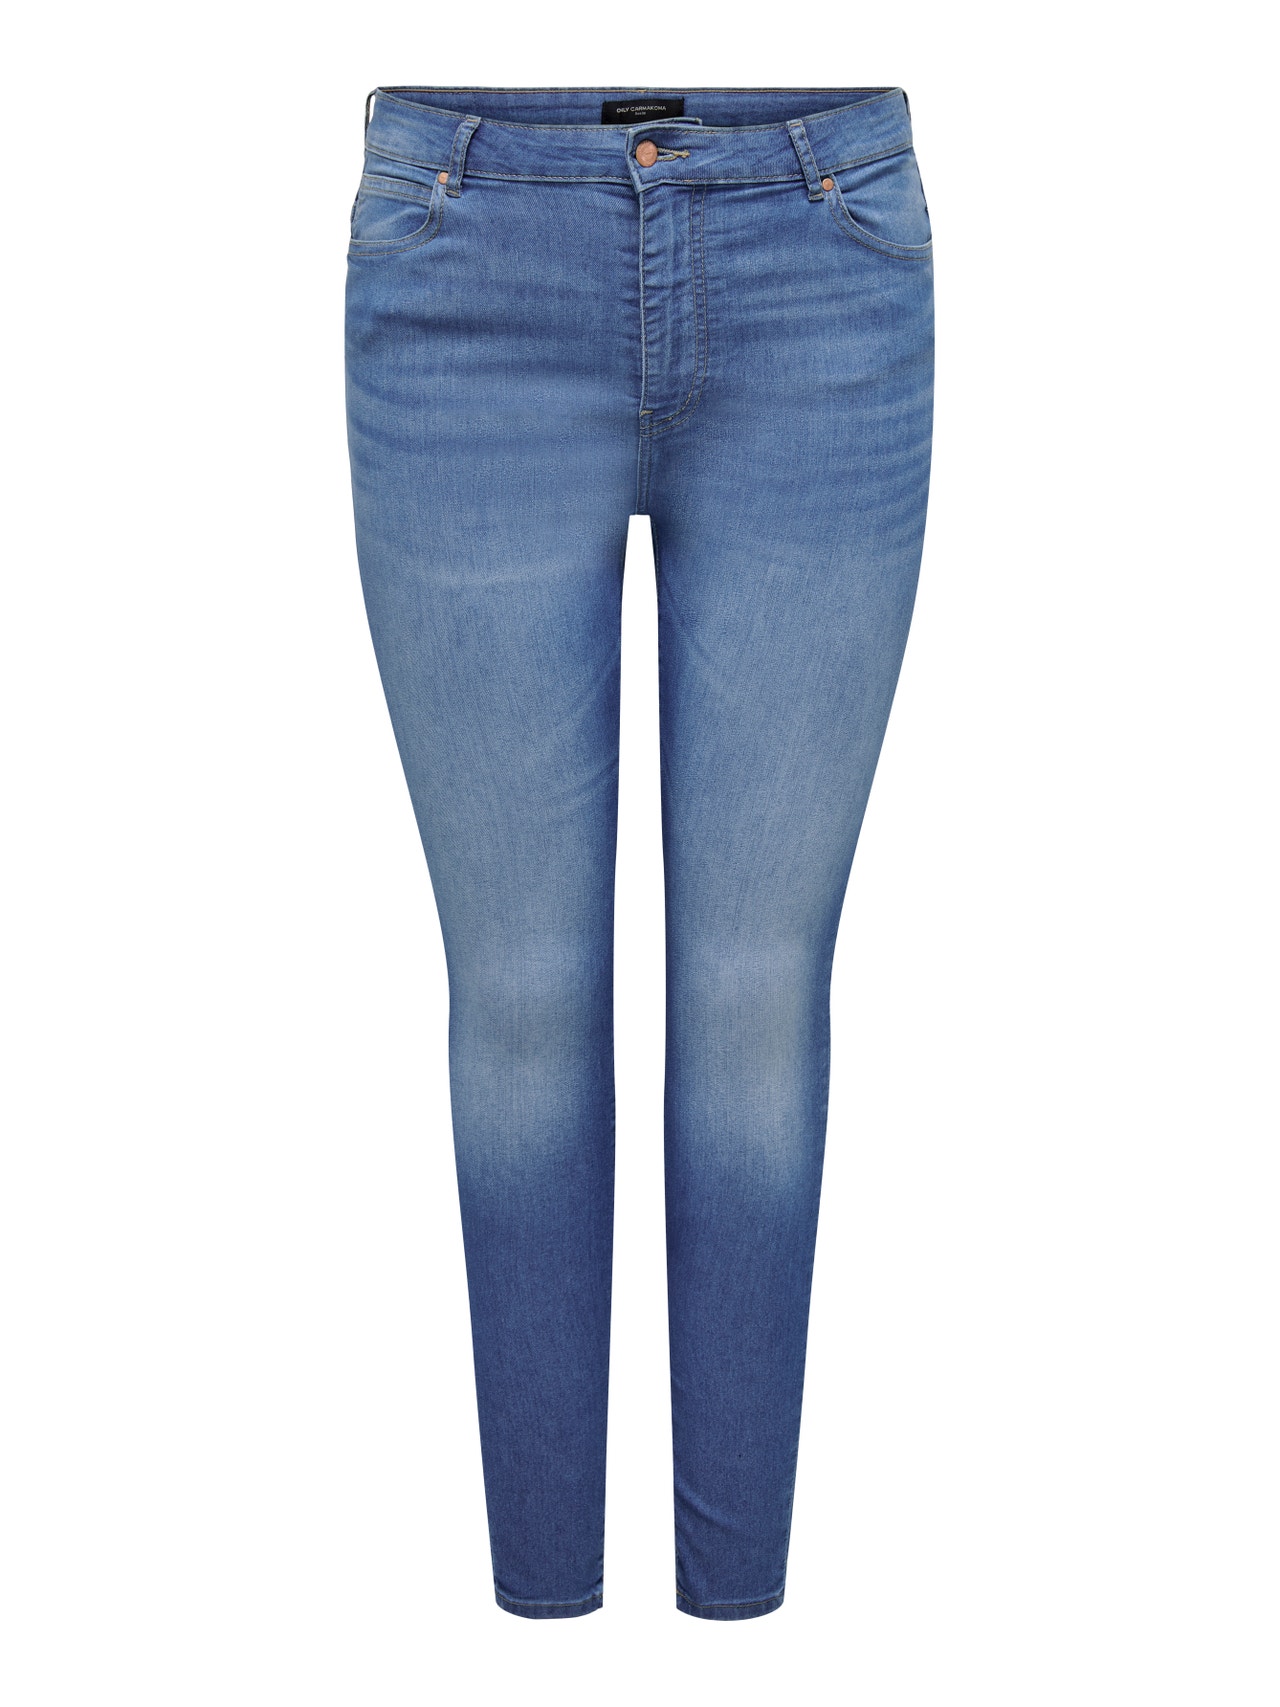 ONLY Skinny Fit Hohe Taille Jeans -Medium Blue Denim - 15276298